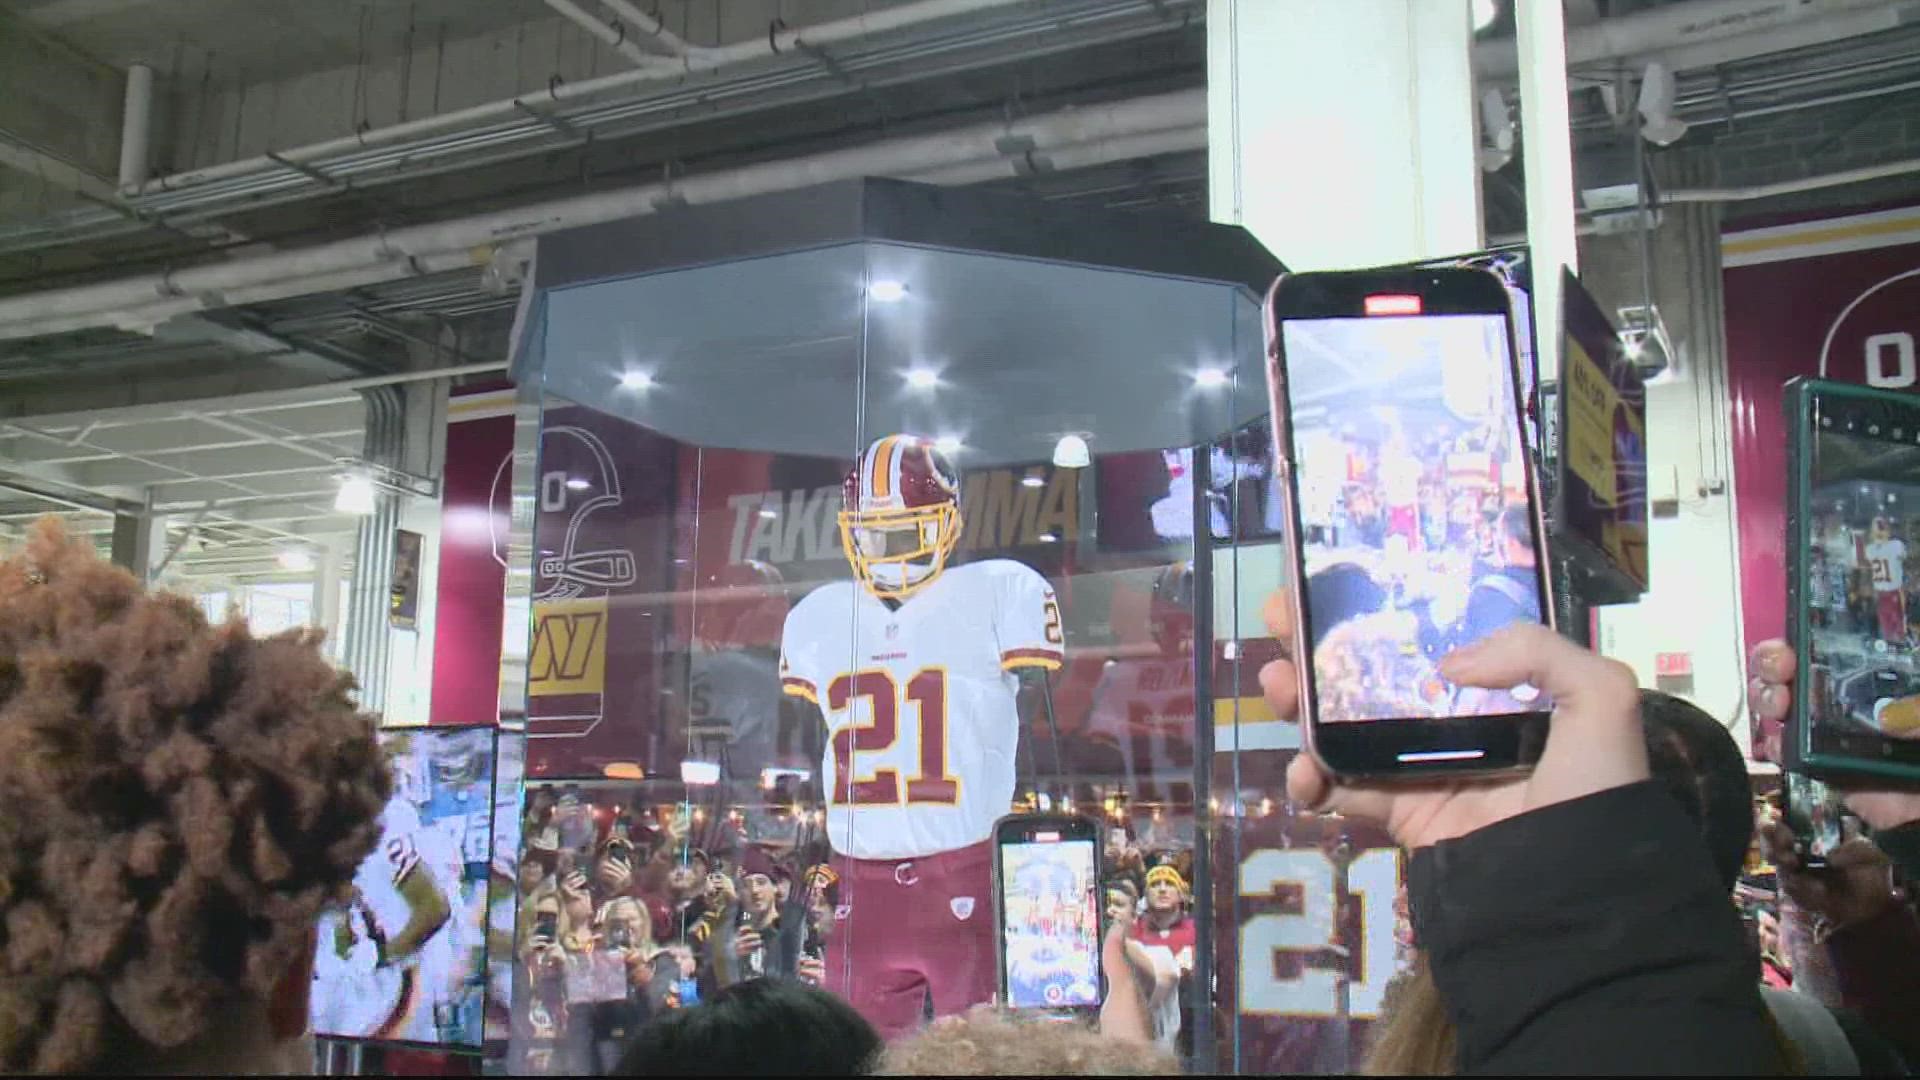 It was not a statue but rather a glass-enclosed installation on the concourse of FedEx Field, which drew ire on social media for being mismatched and falling short.